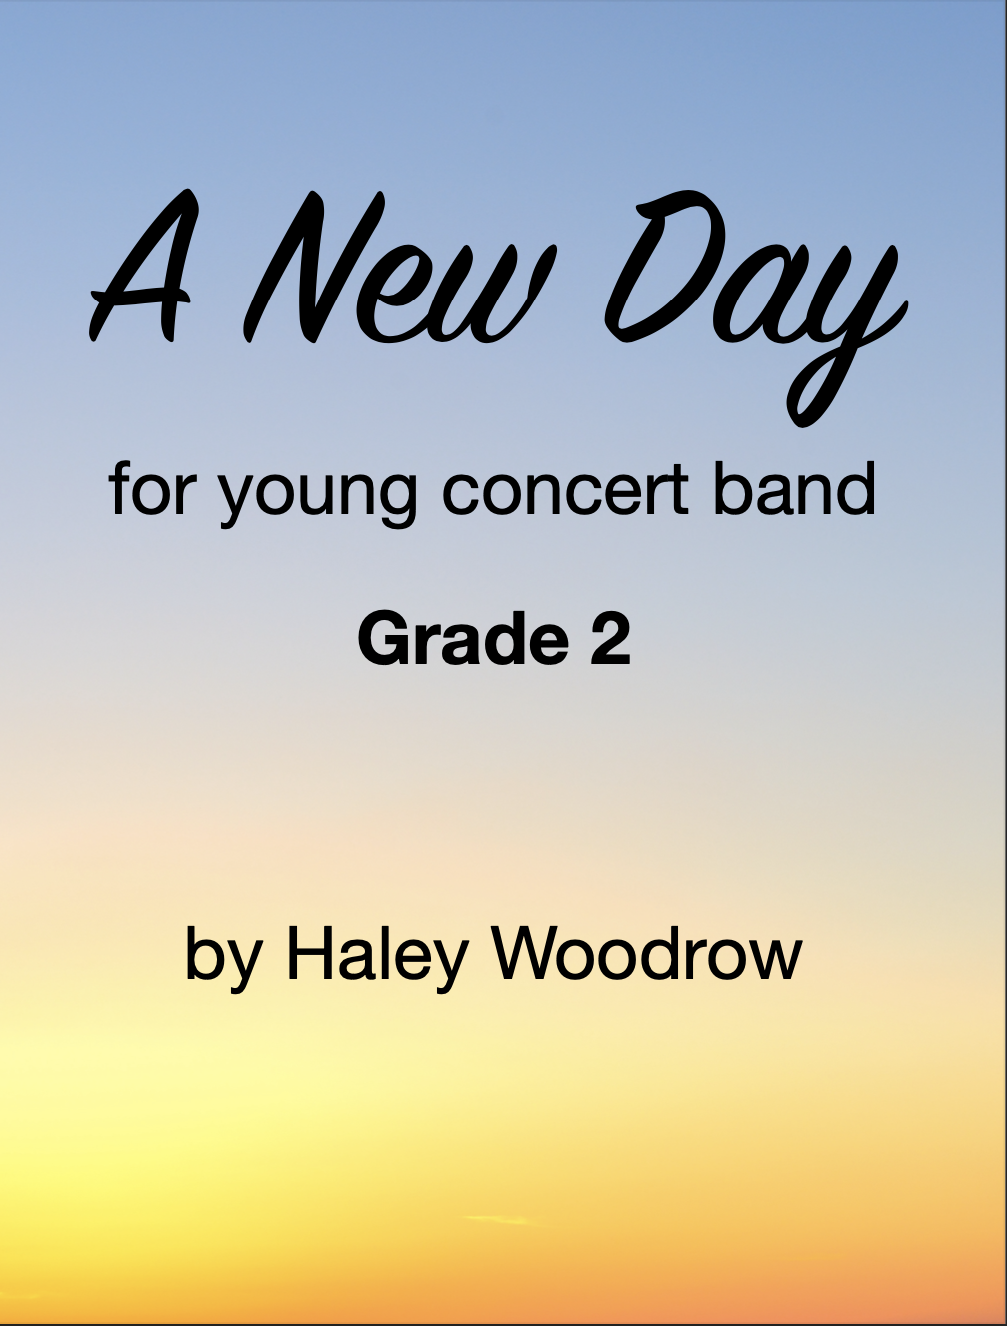 A New Day by Haley Woodrow